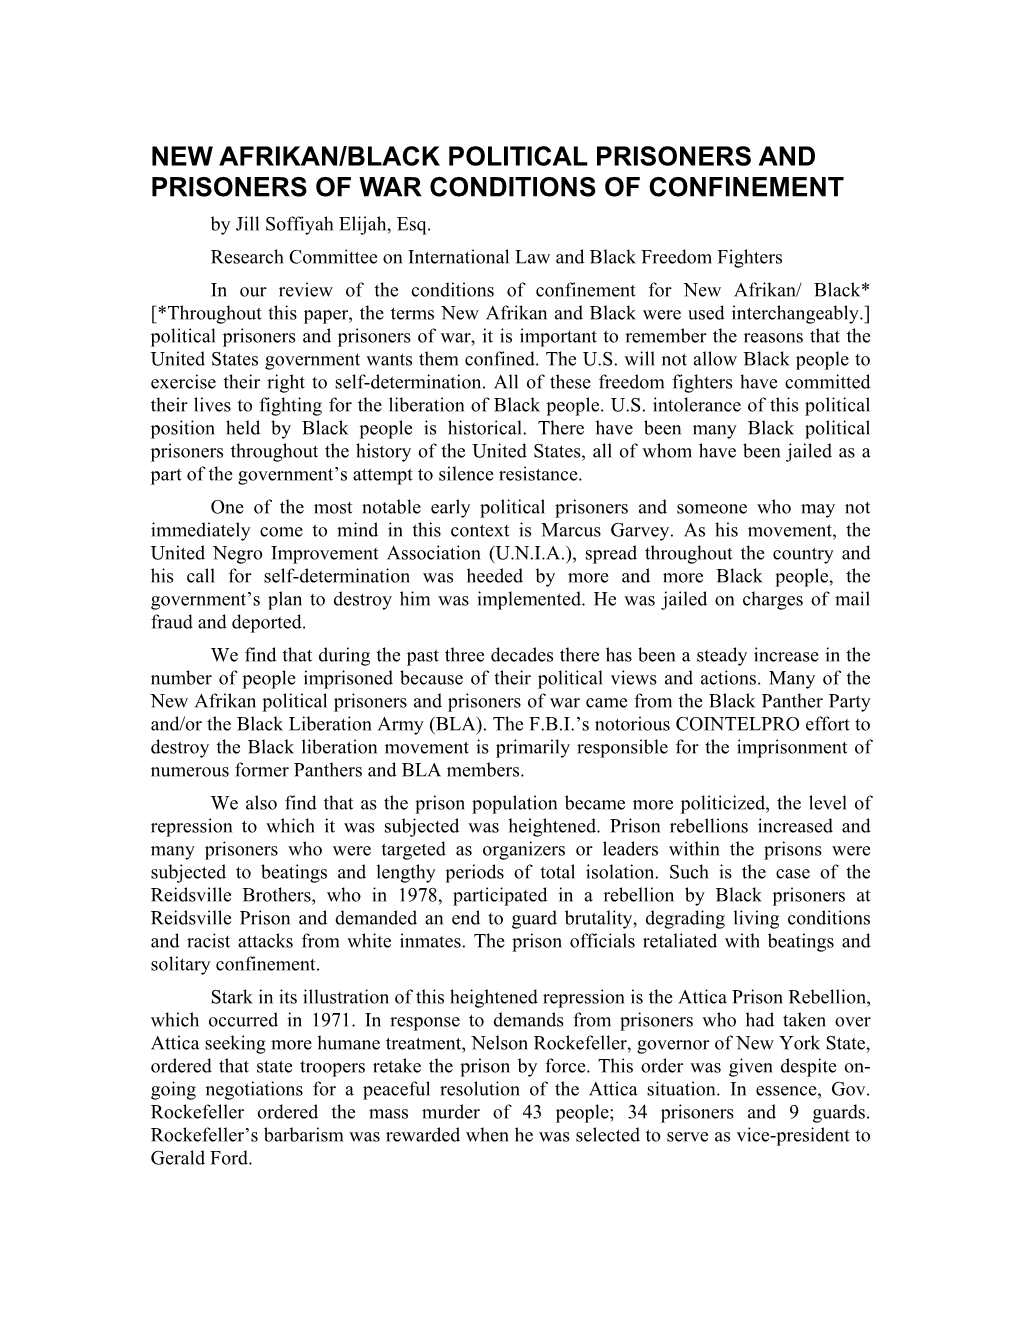 NEW AFRIKAN/BLACK POLITICAL PRISONERS and PRISONERS of WAR CONDITIONS of CONFINEMENT by Jill Soffiyah Elijah, Esq